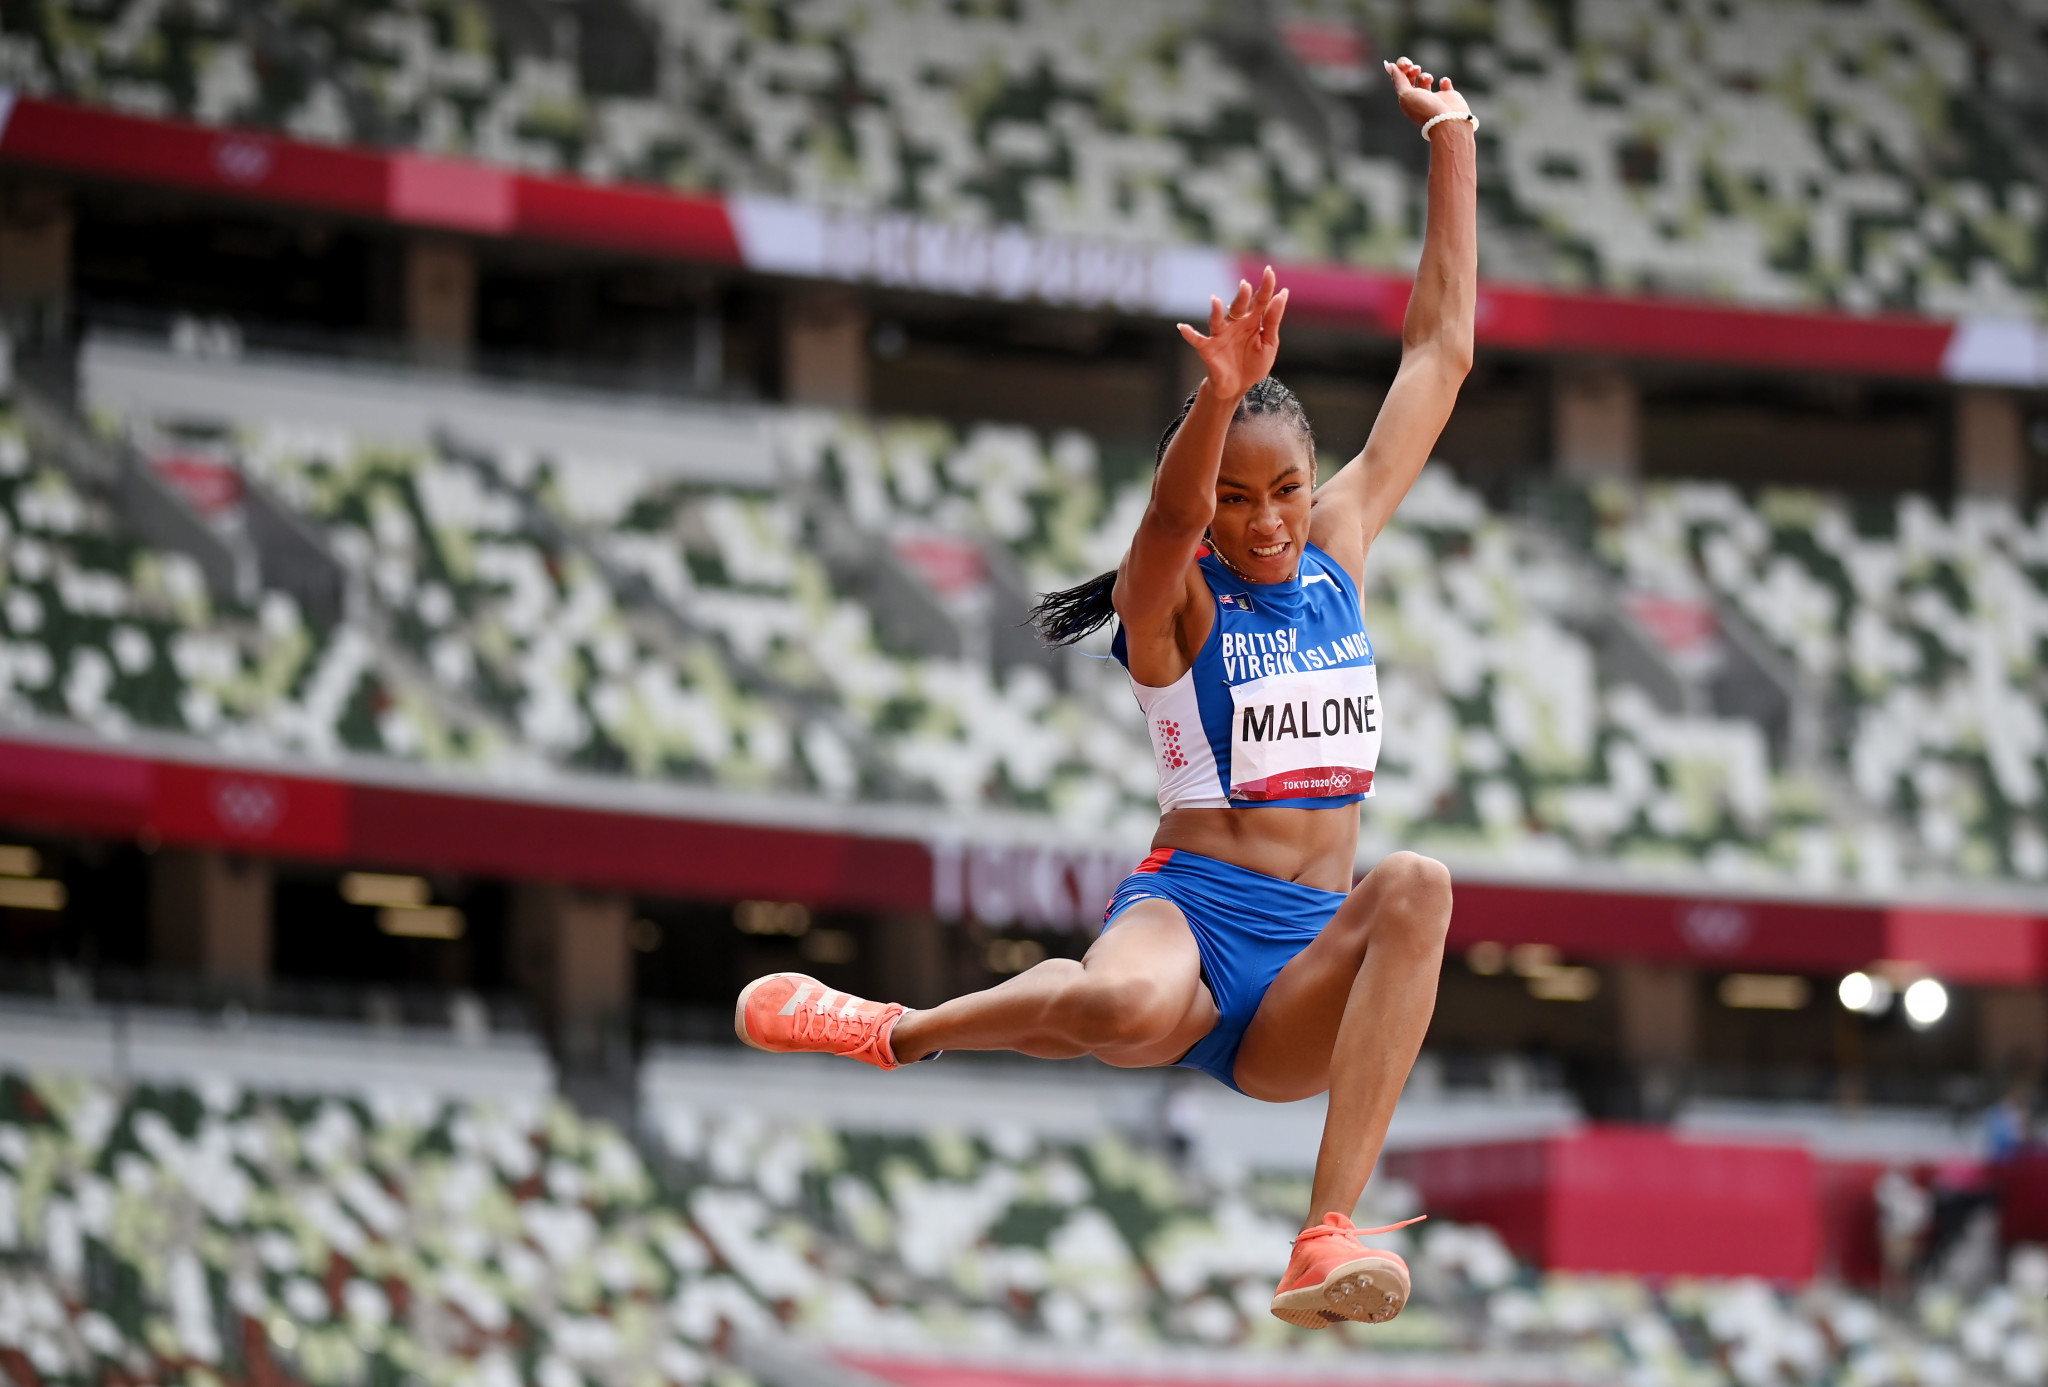 BVI medal hope Malone aims to compete at Birmingham 2022 and World Athletics Championships